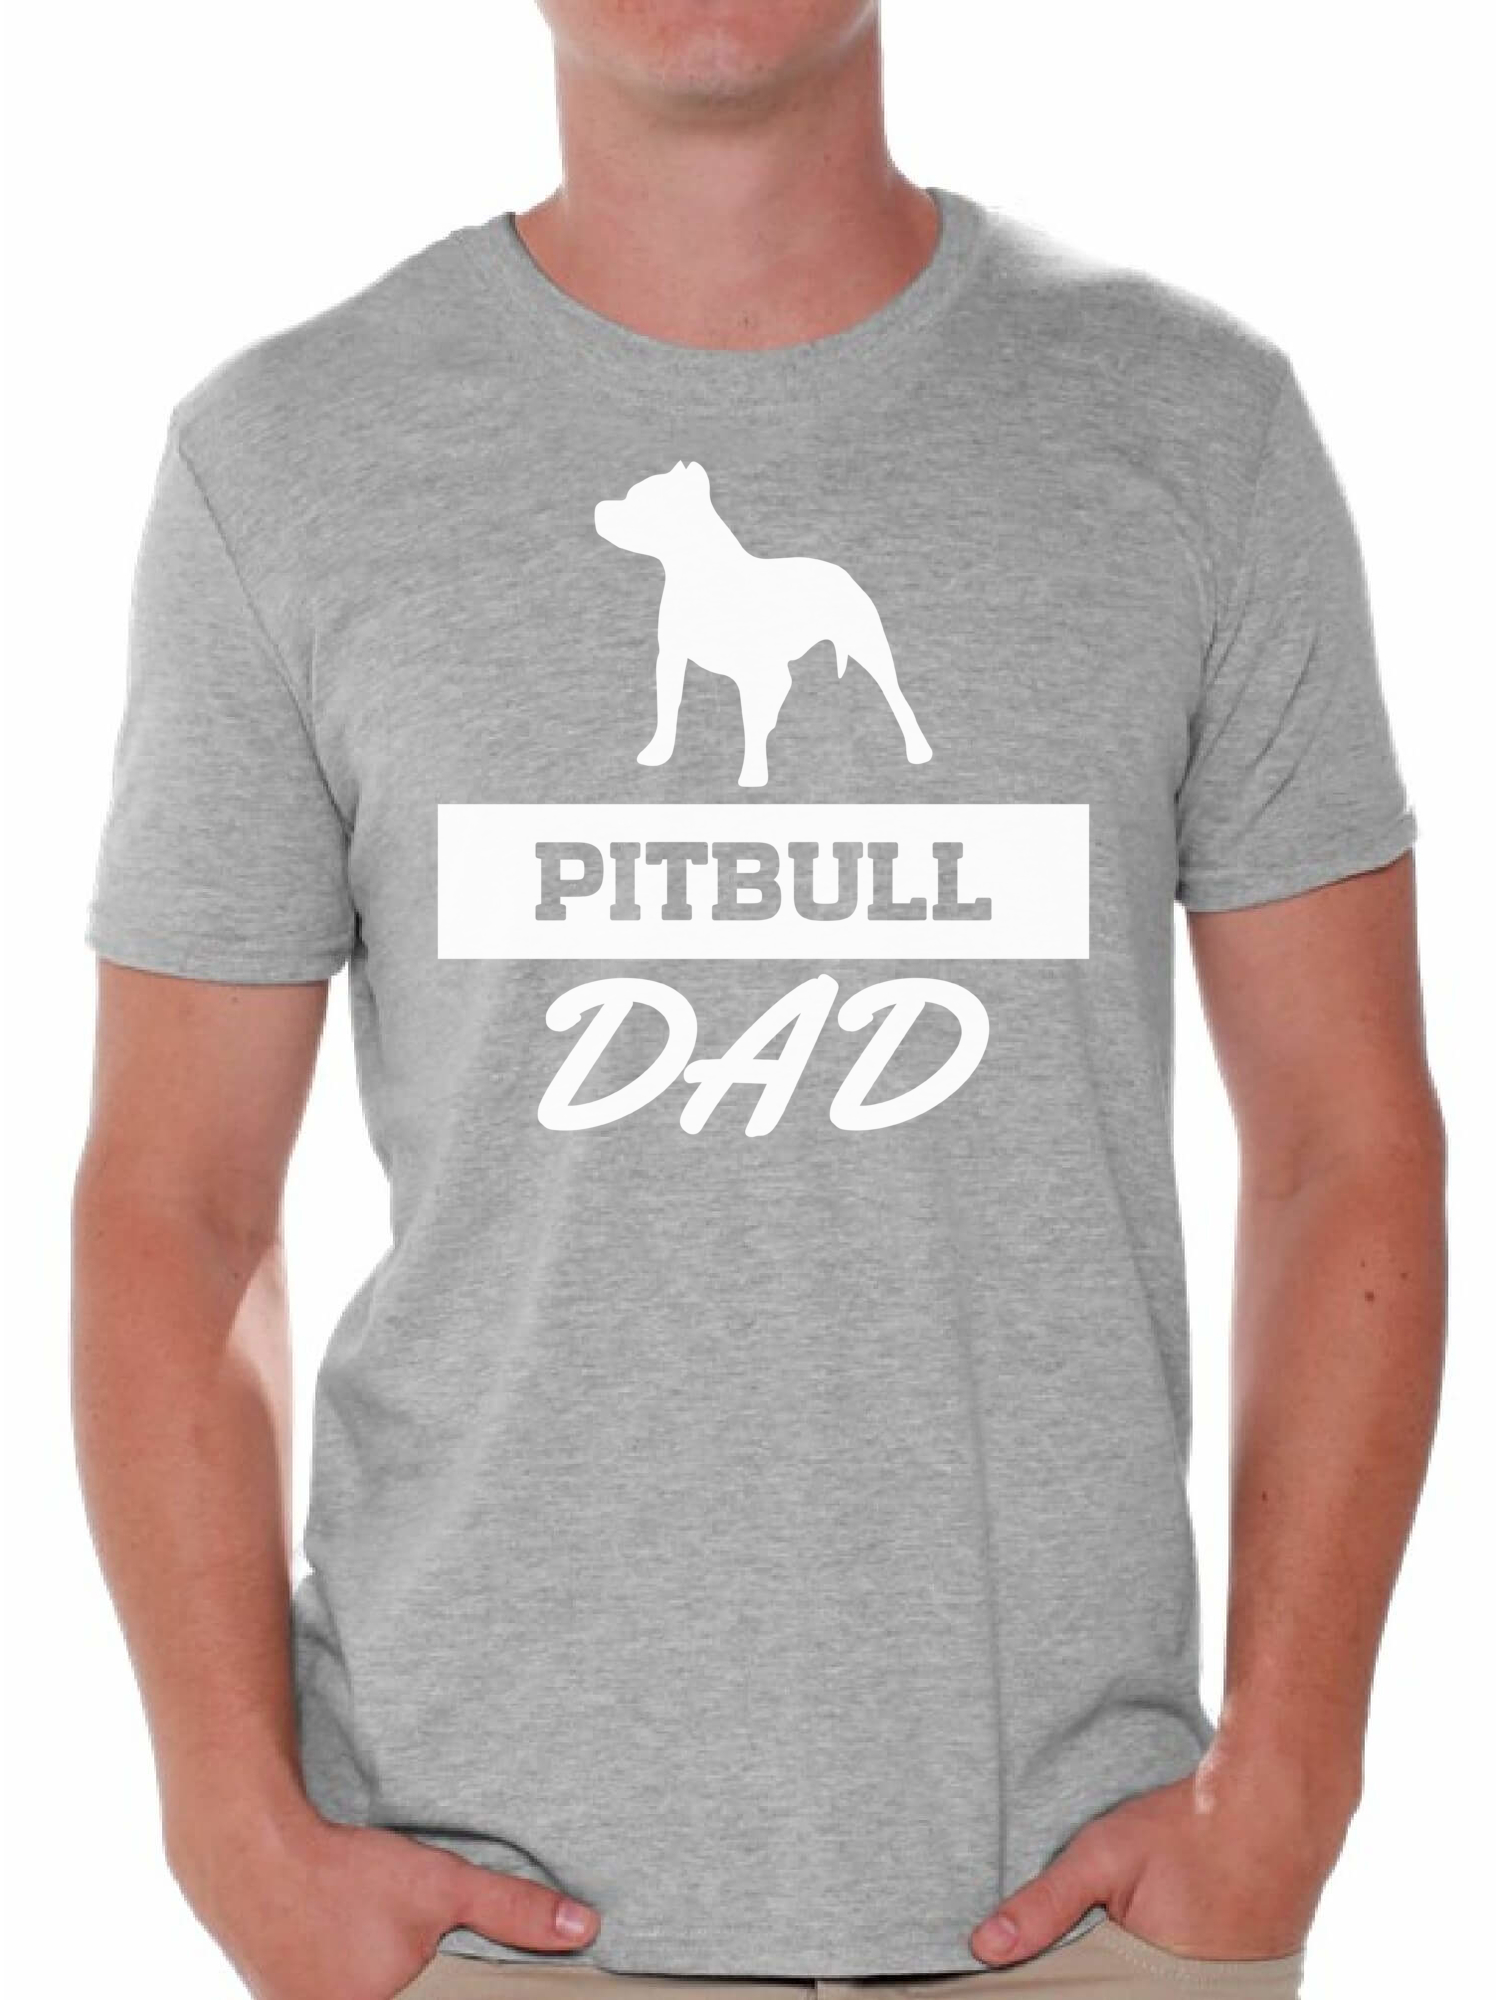 Awkward Styles Dog Dad T Shirt Dog Lover Shirt Best Dad Tee Shirt Gift for Dad Dog Owner Shirt Fathers Day Gifts for Dad Dog Dad Outfit for Men - image 1 of 4